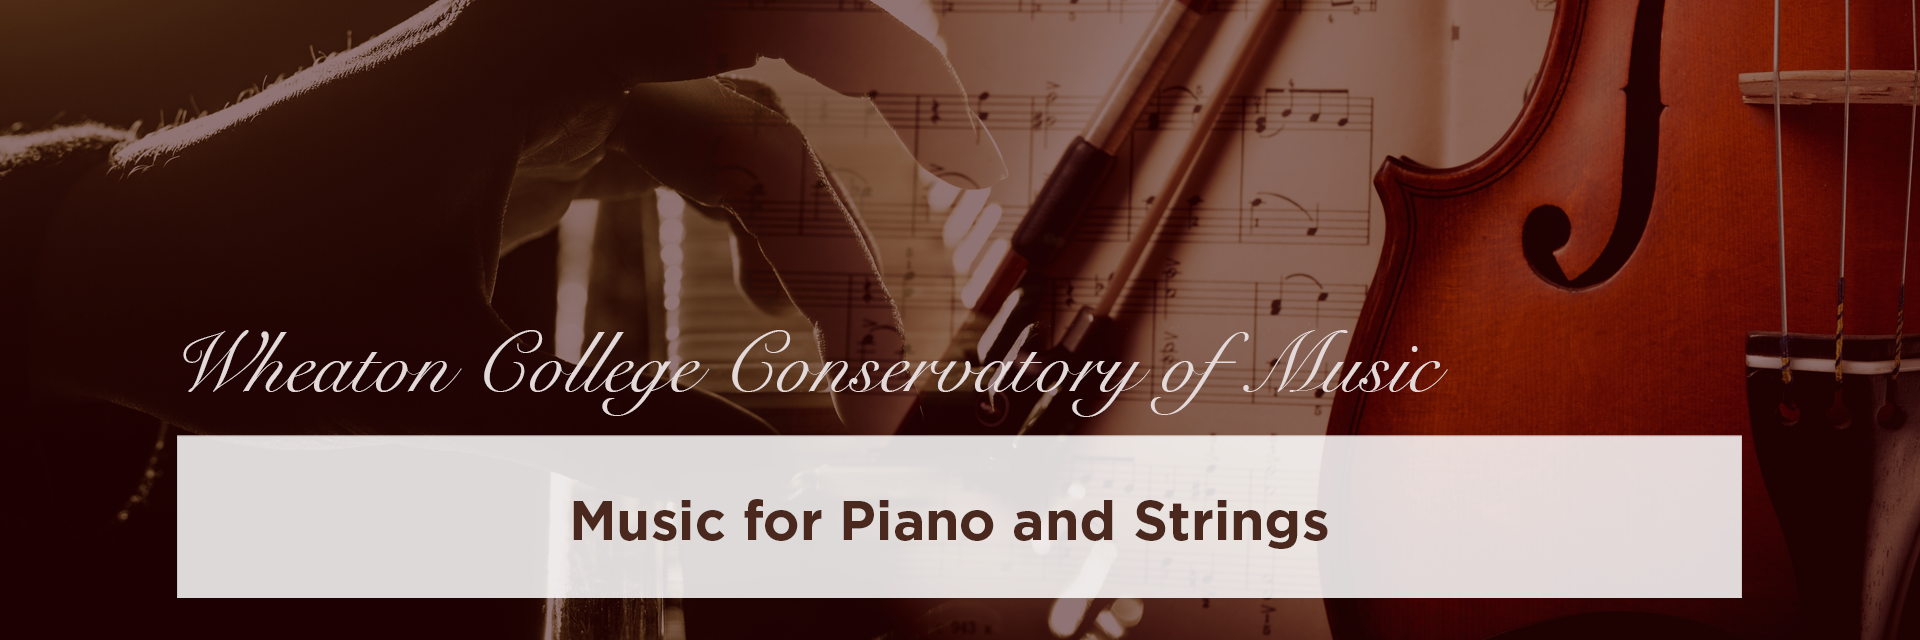 Wheaton College Faculty Artists: Piano and Strings